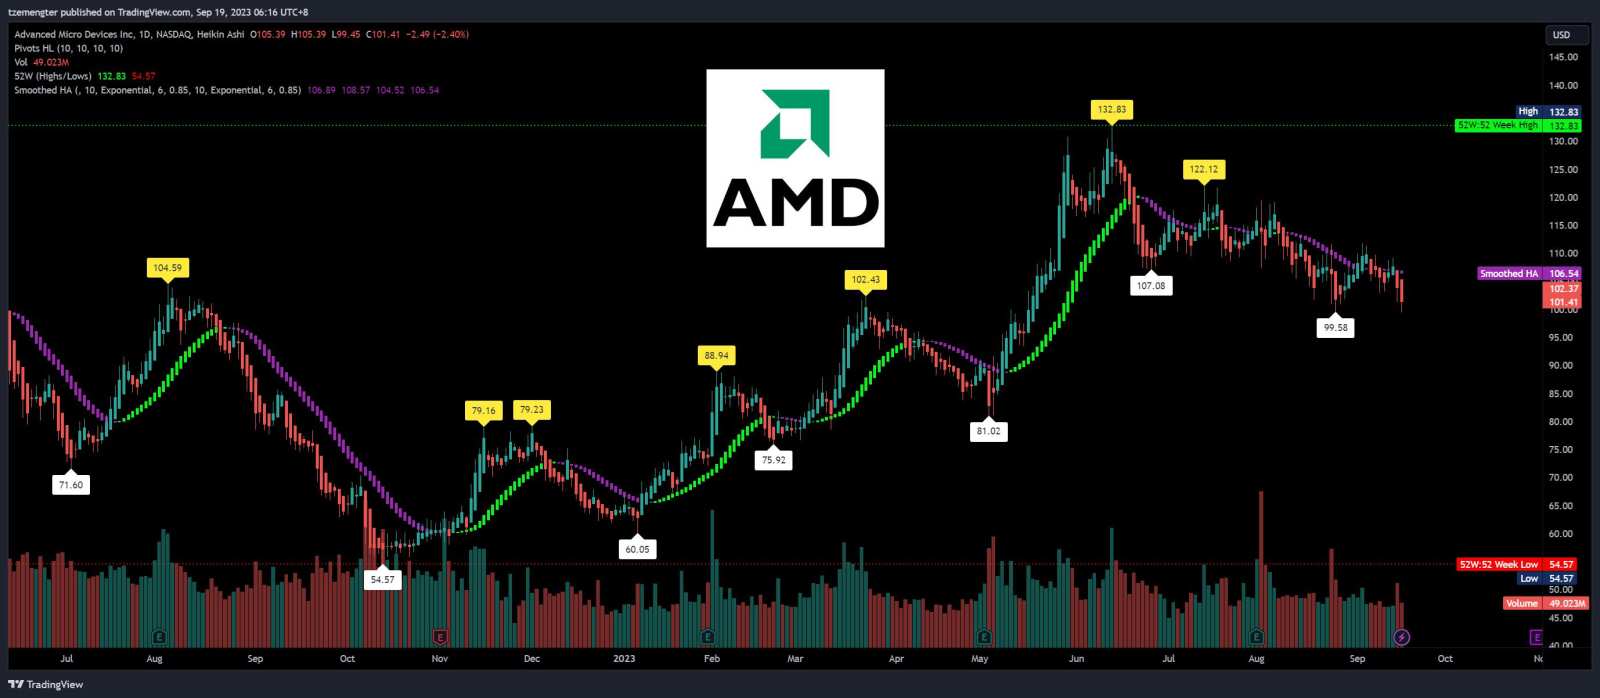 $Advanced Micro Devices(AMD.US)$ bounce at $99 again